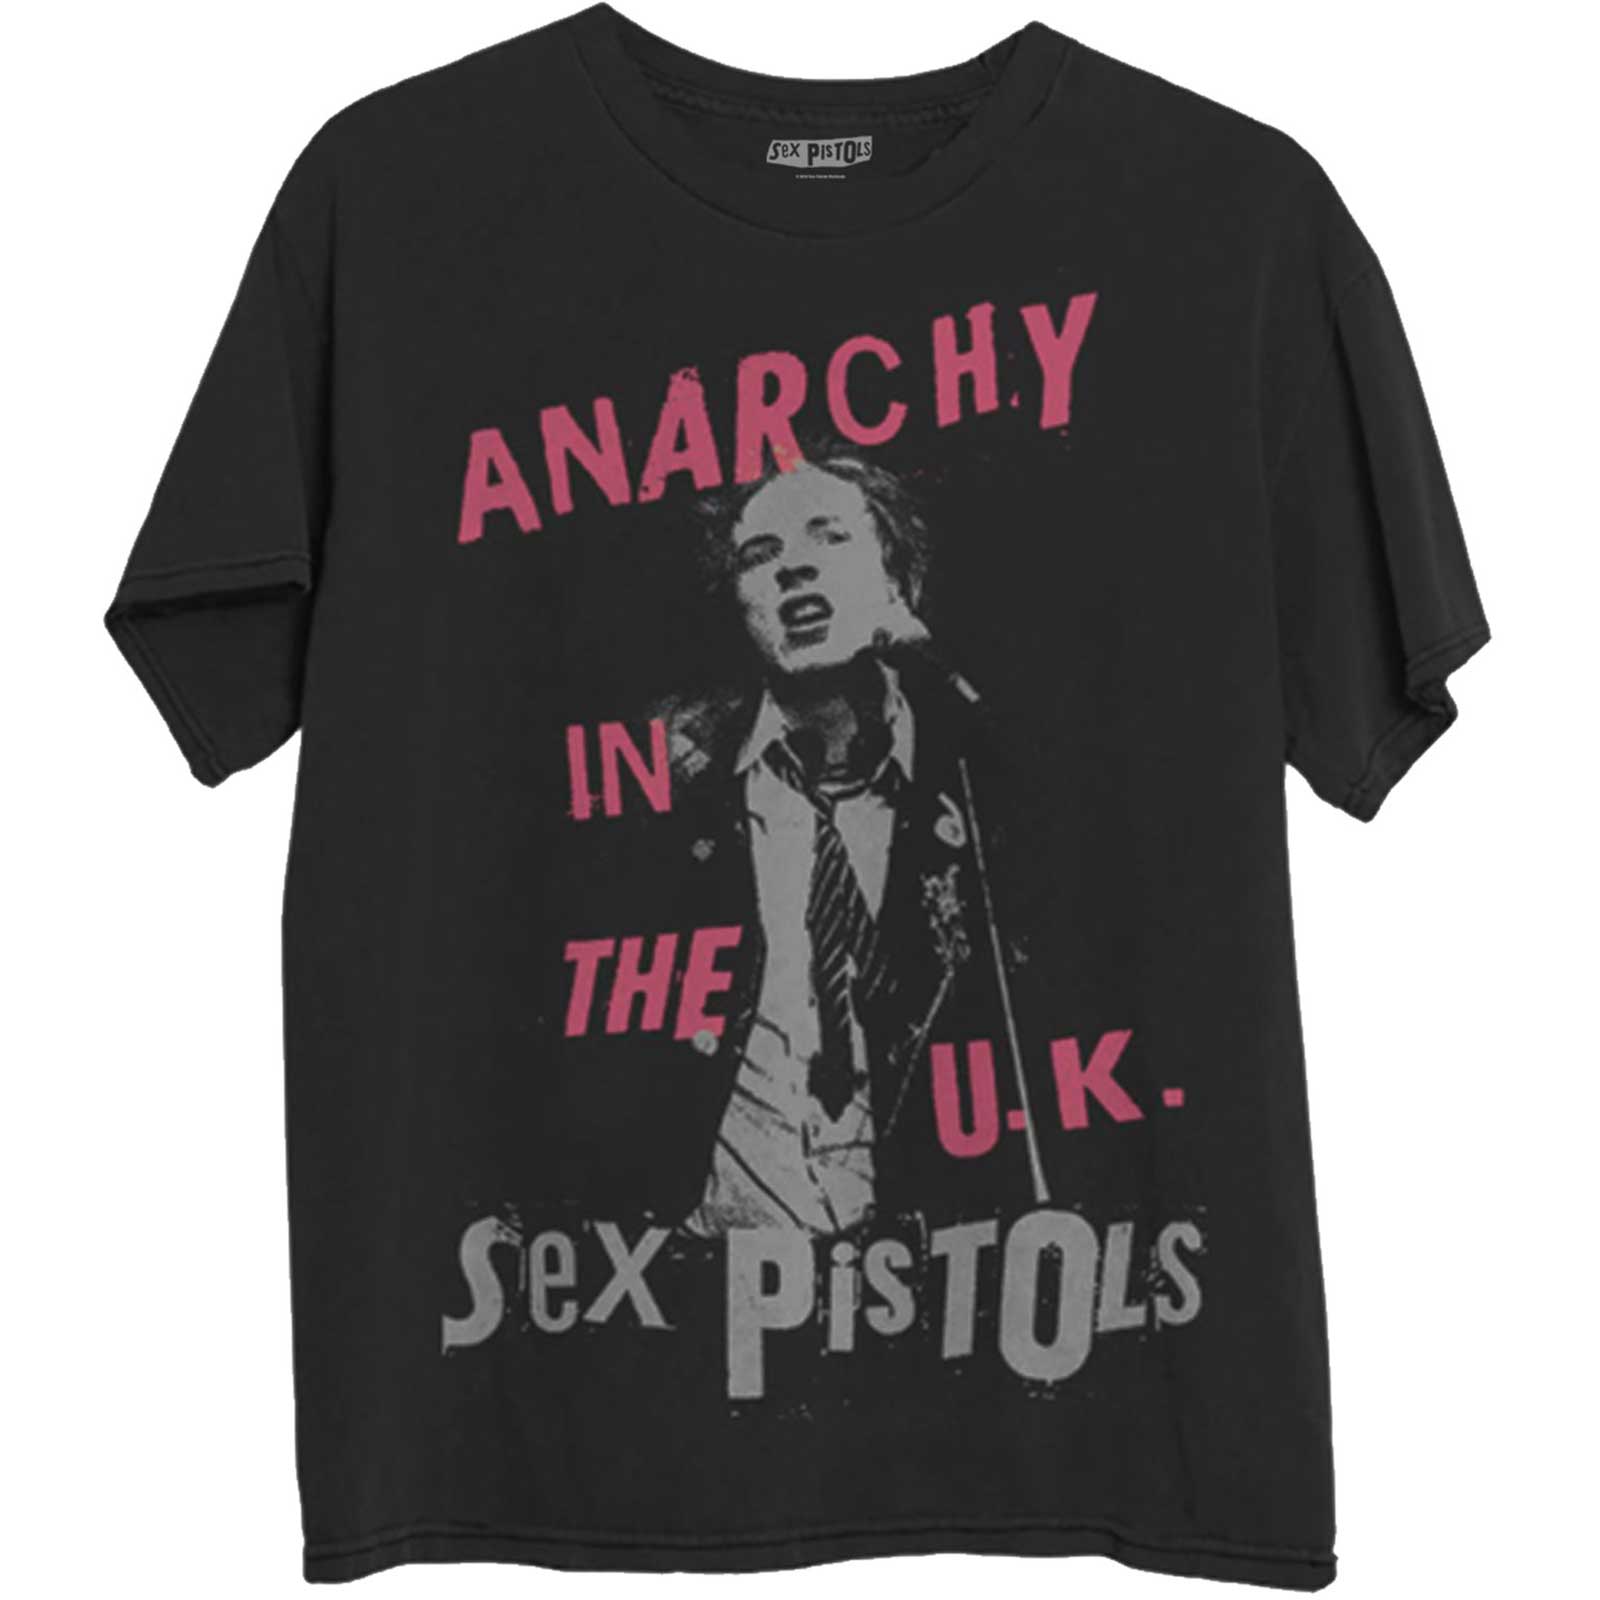 The Sex Pistols T-Shirt - Anarchy in the UK (Unisex)